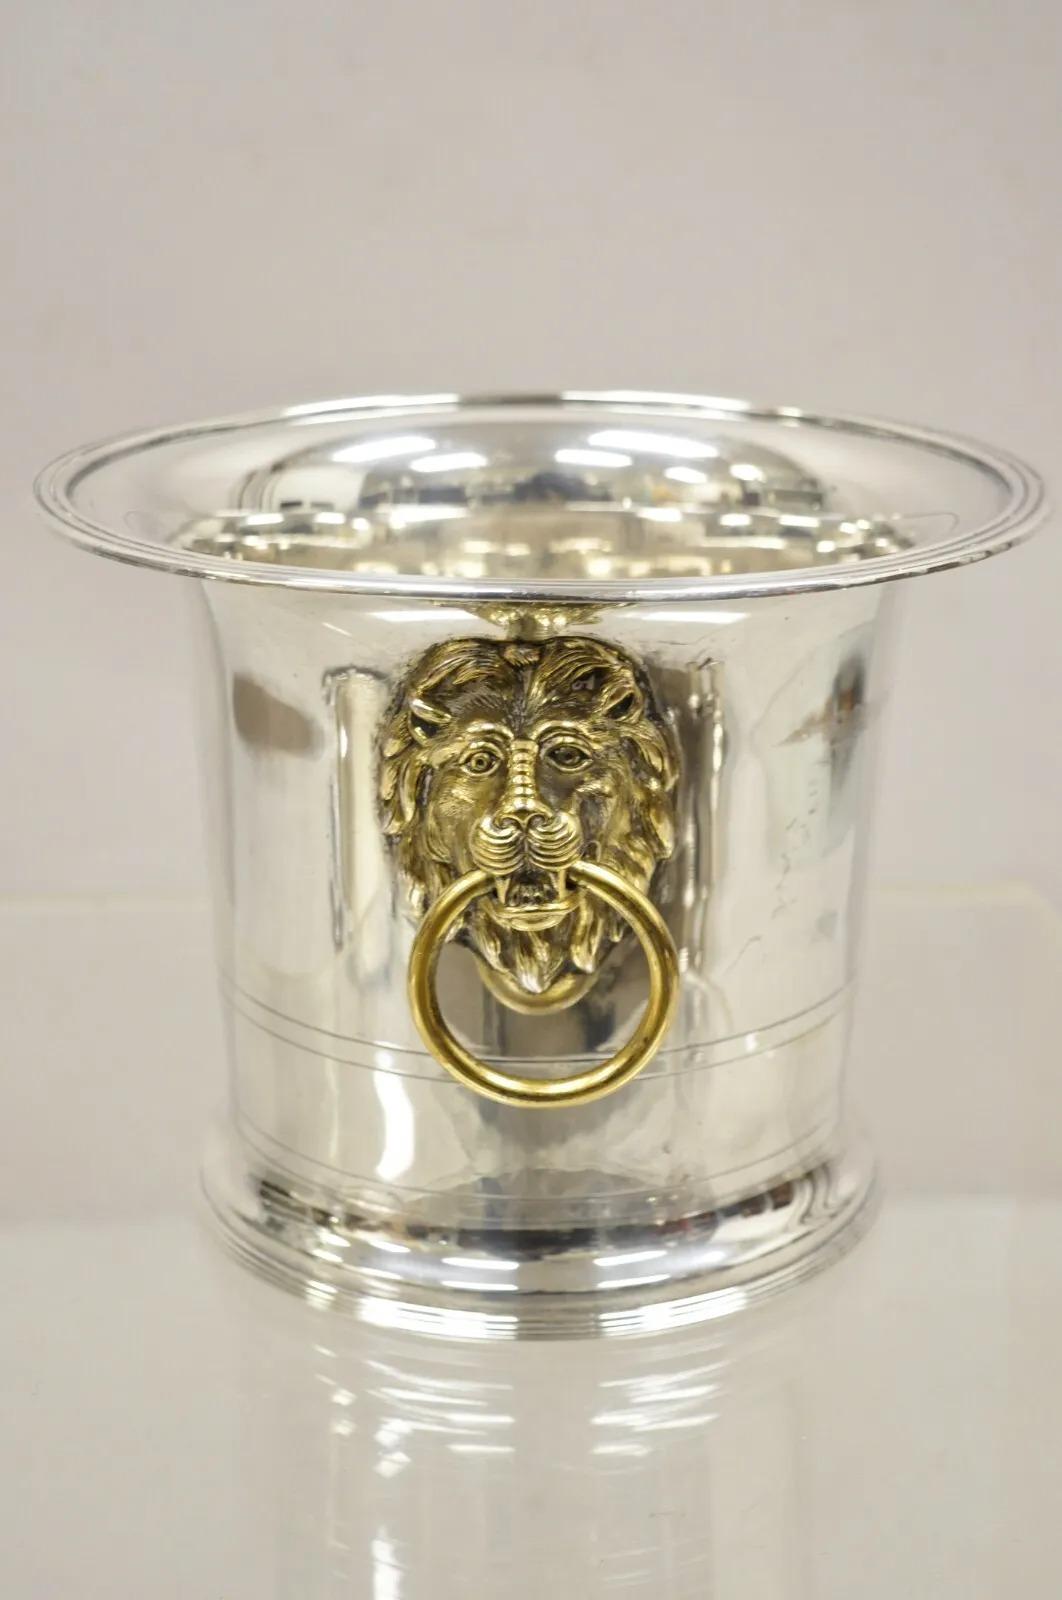 Regency The Franklin Mint 1986 Silver Plated Fluted Champagne Chiller Lion Ice Bucket For Sale